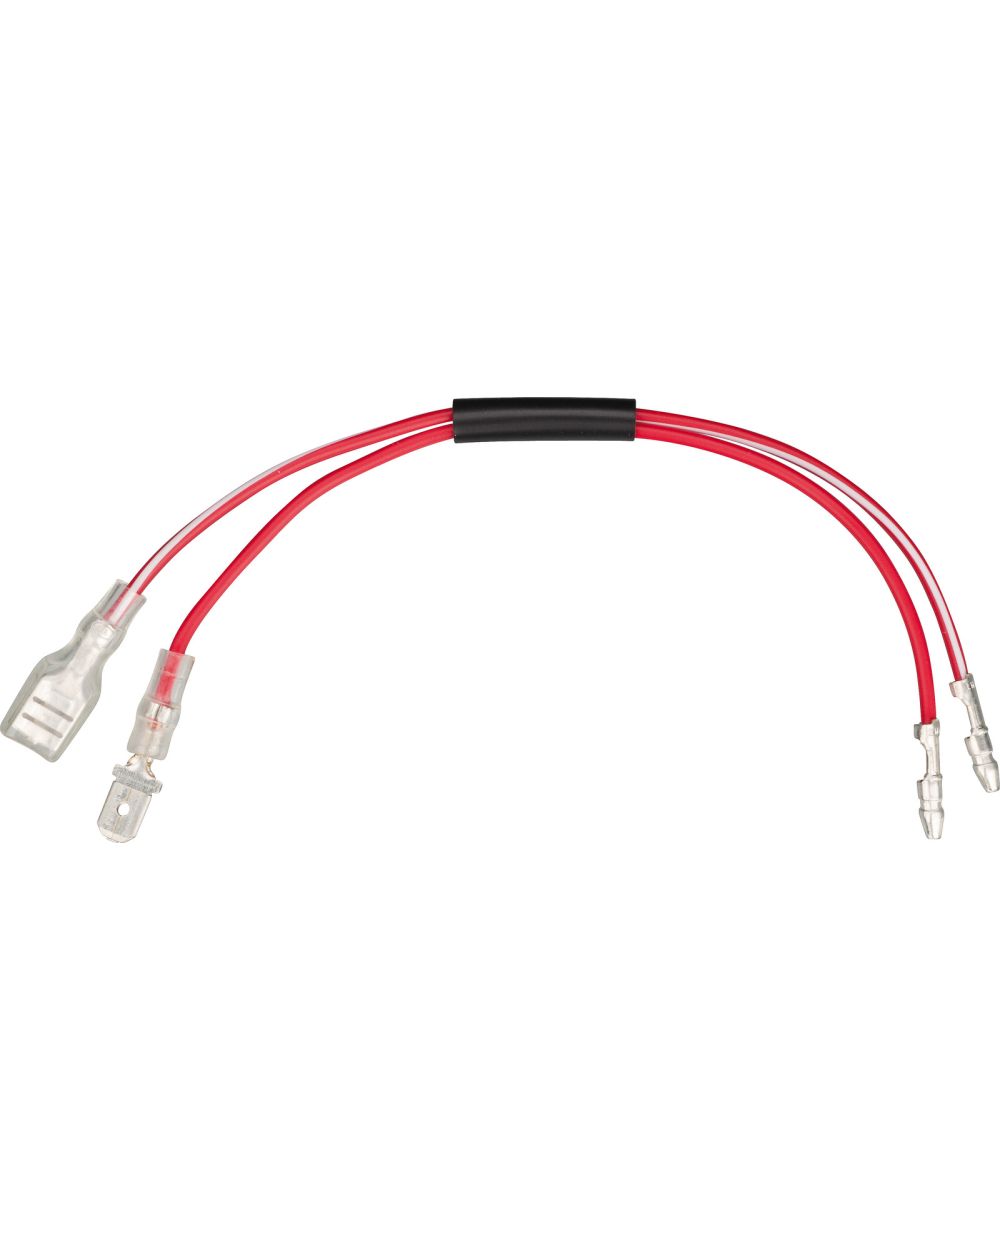 Universal cable set 6.3mm jack and plug to 2x Japanese plugs, cable length  incl. plug 18cm